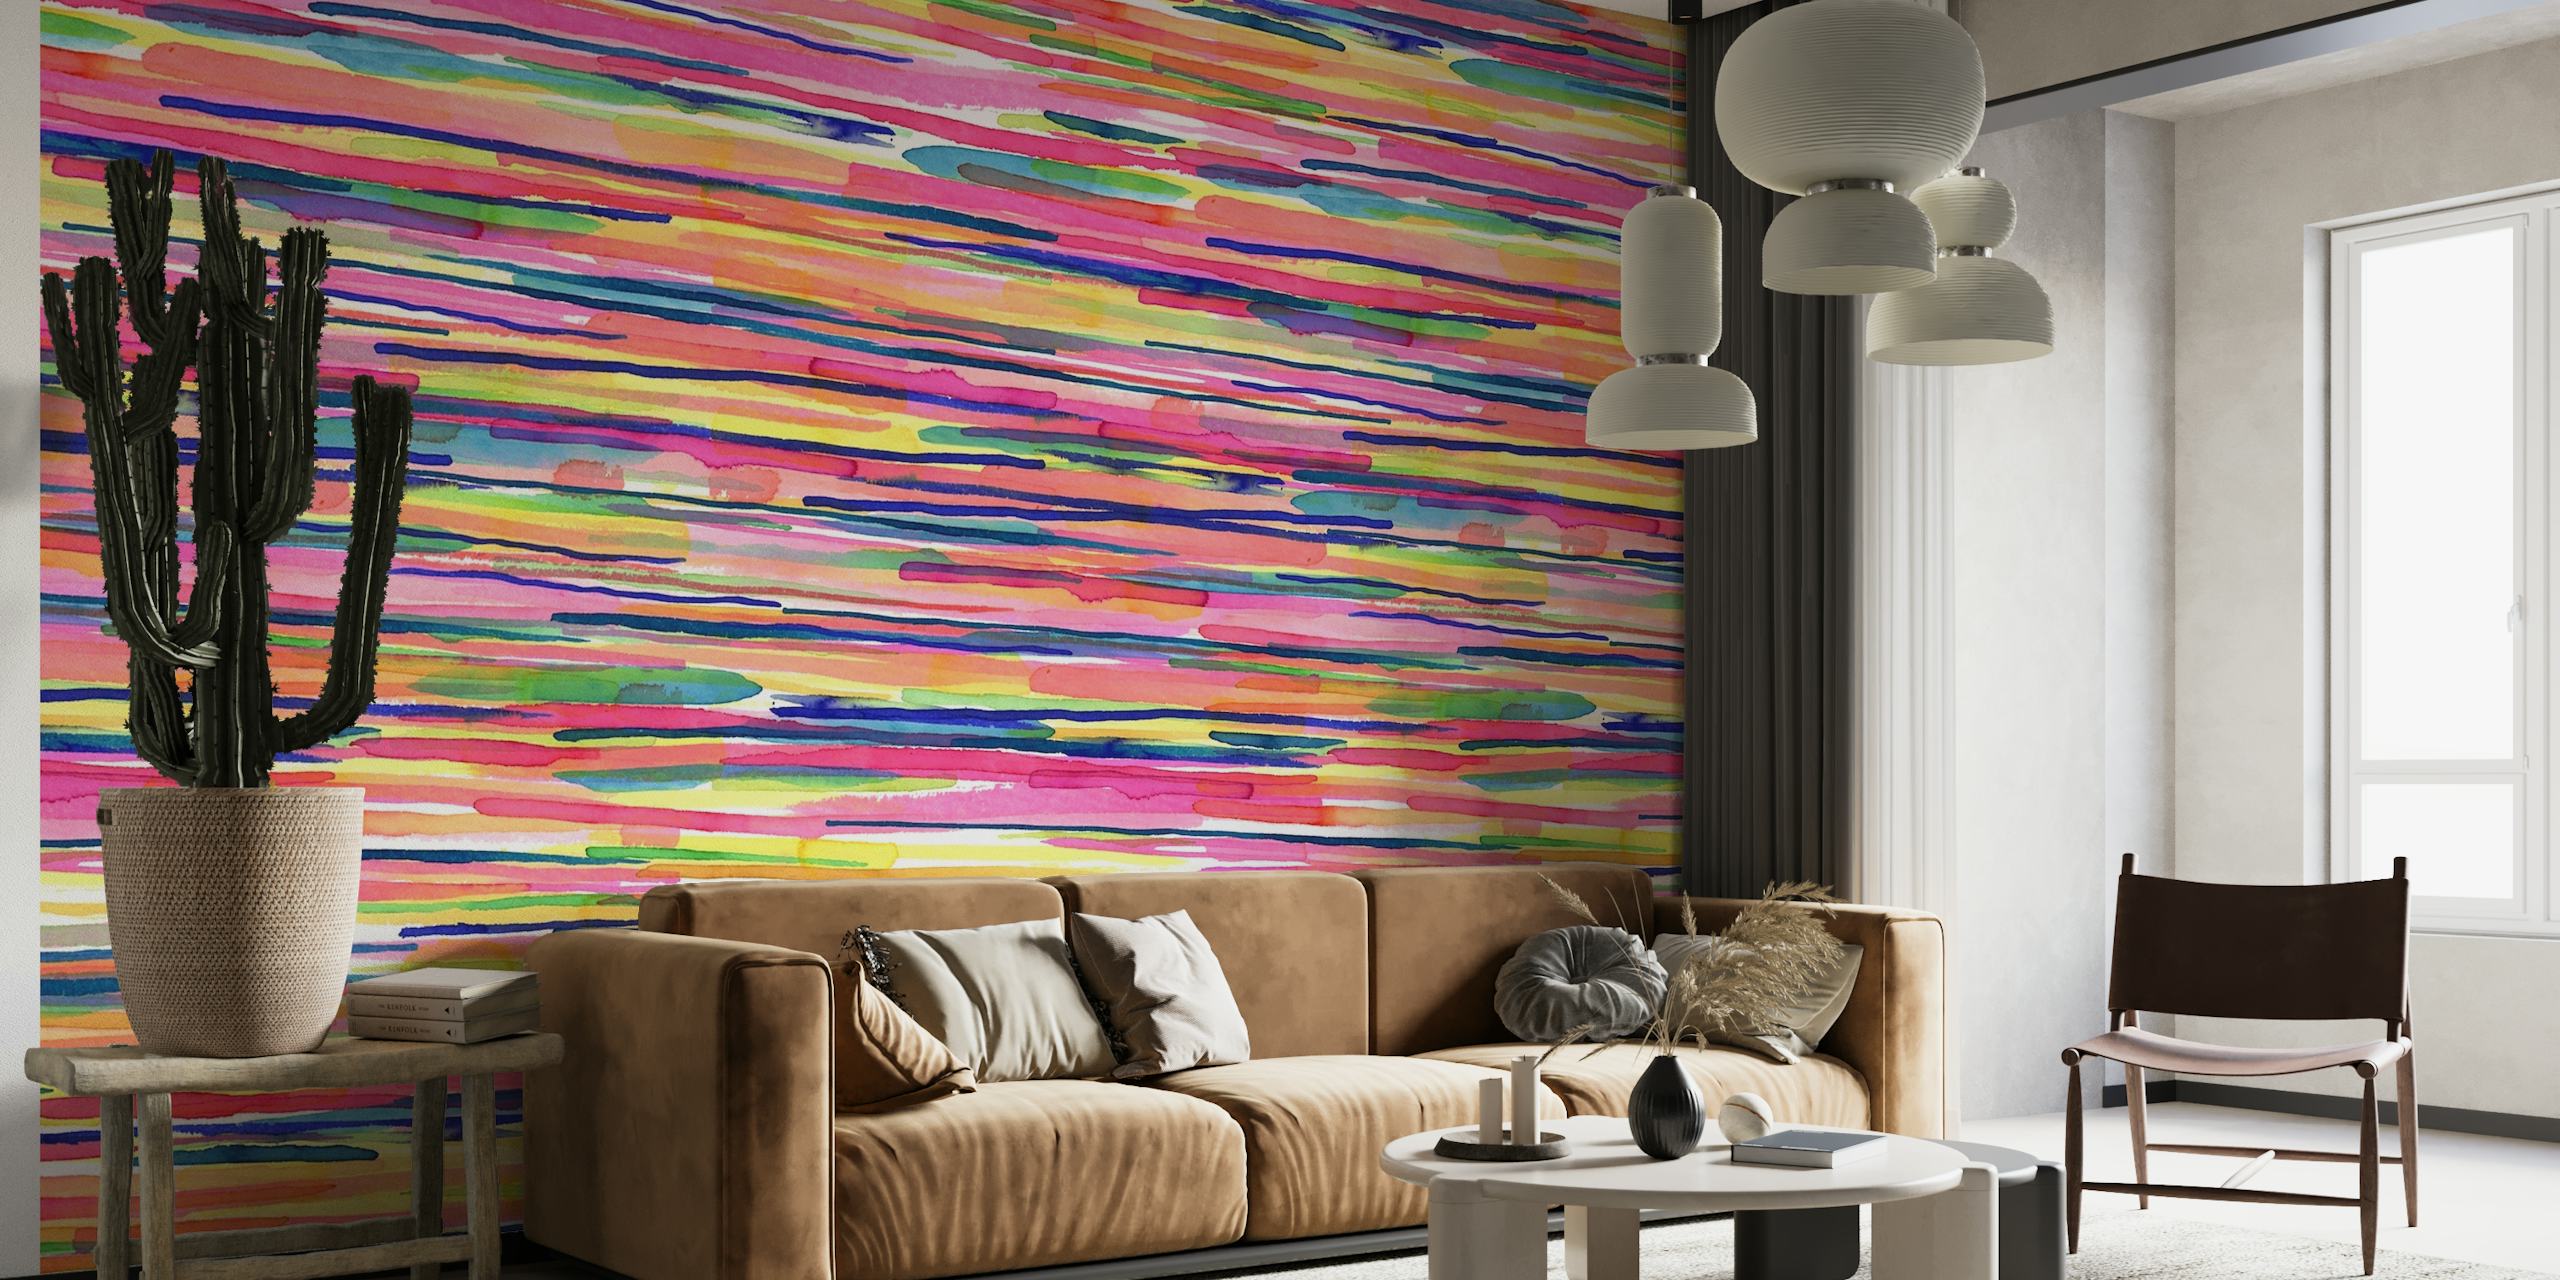 Colorful Thin Stripes behang